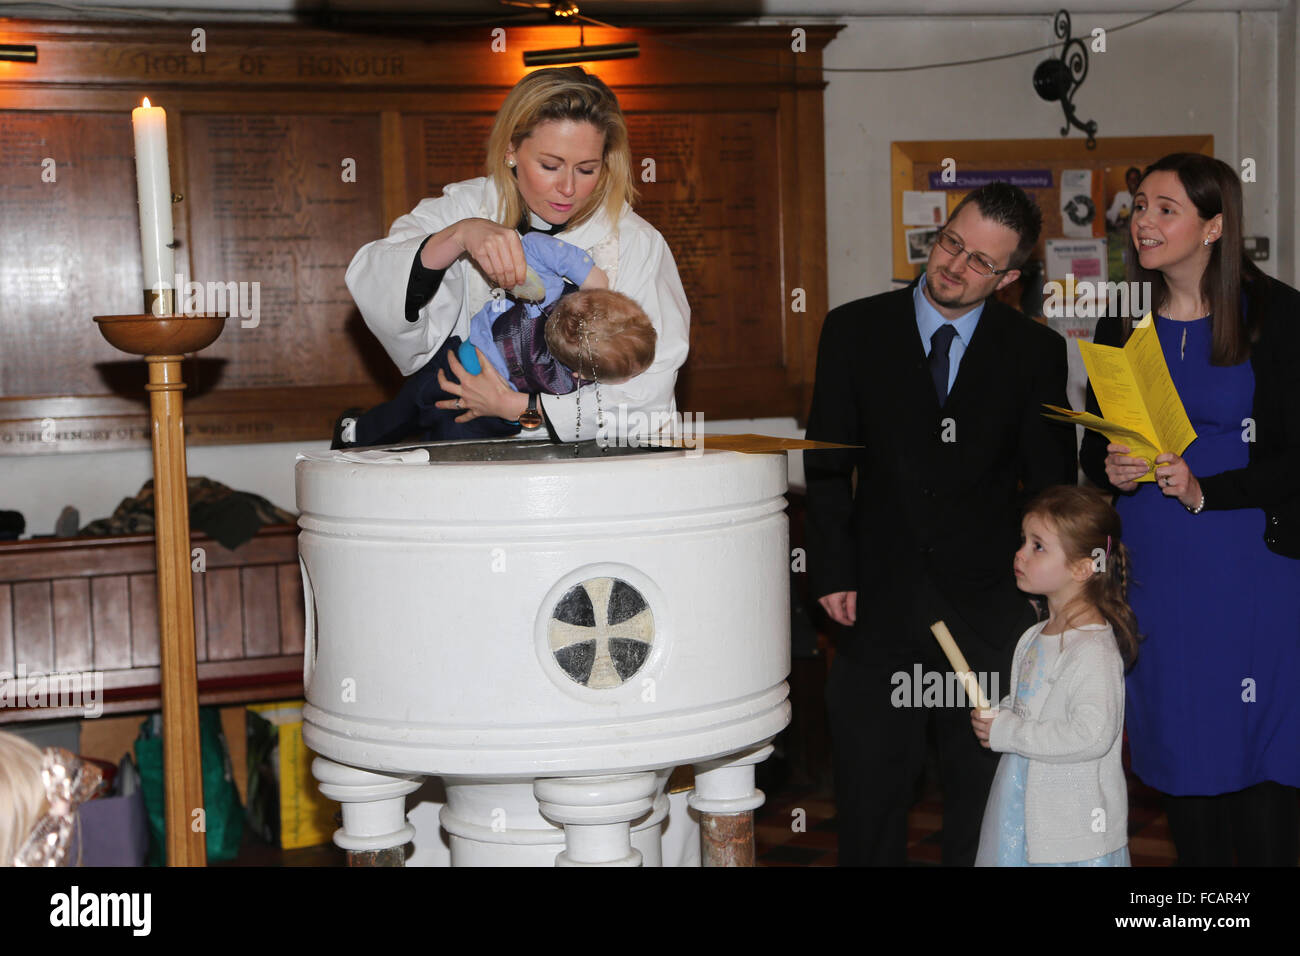 Christening At St Mary's Church Caterham On The Hill Surrey England Female Priest Pouring Holy Water On Baby Boy Using Shell Stock Photo